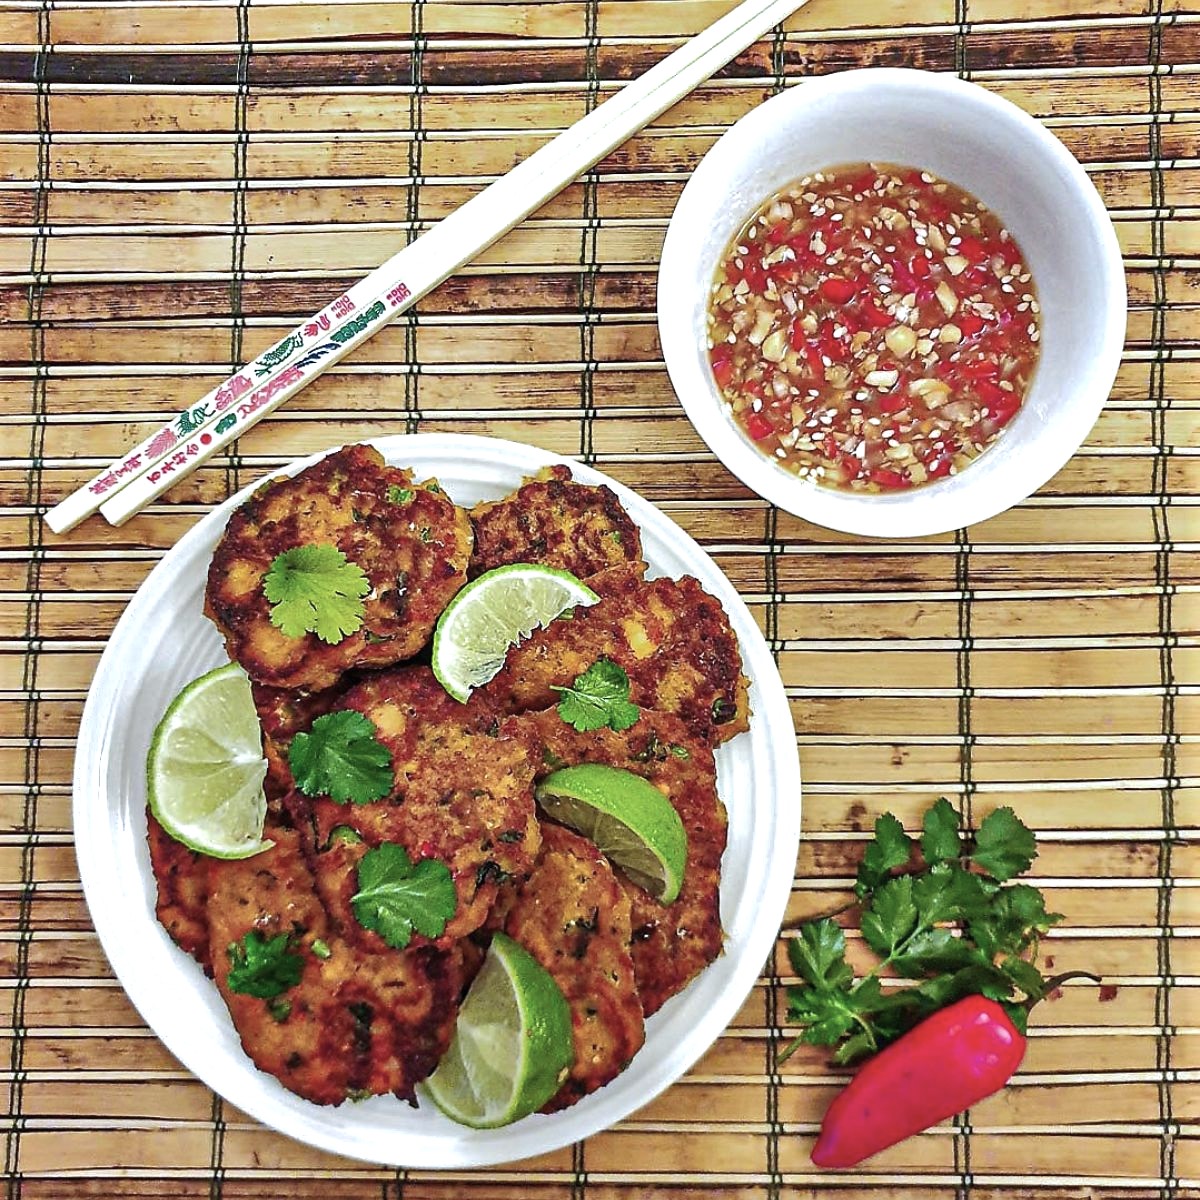 A plate of Thai salmon fishcakes next to a bowl of spicy dipping sauce.